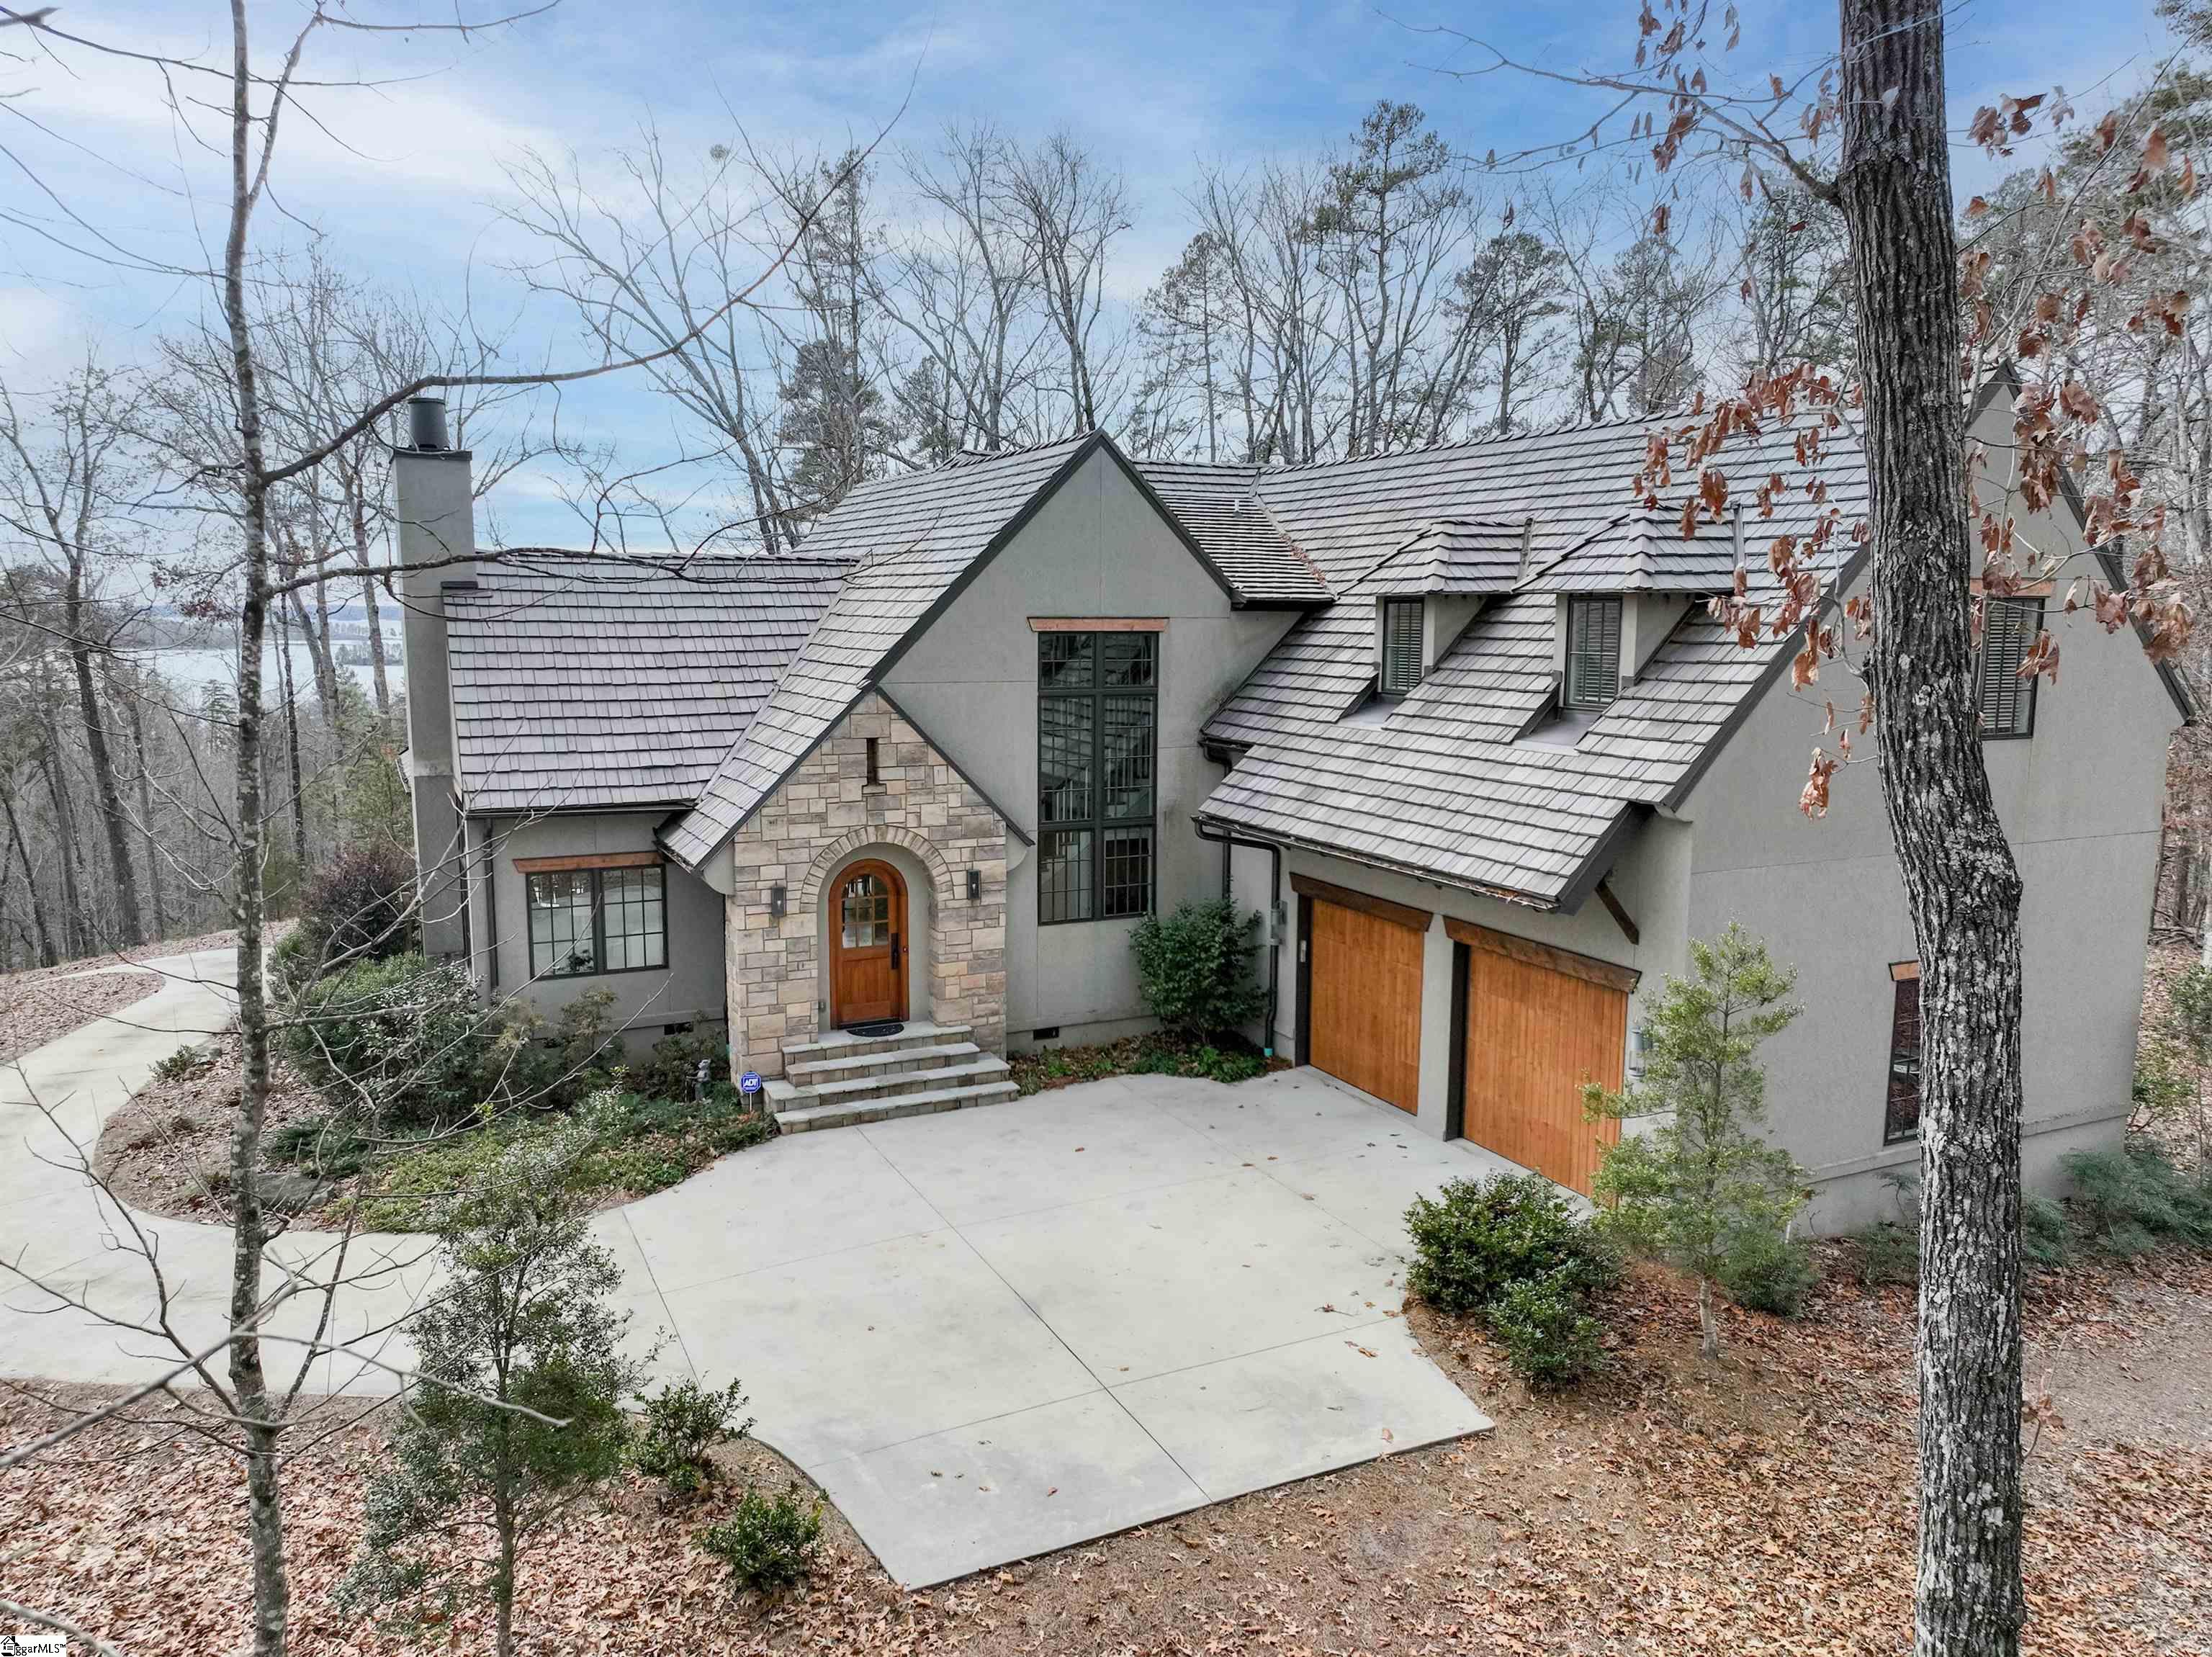 151 S Falls Rd: An opportunity to purchase a beautiful home with exceptional privacy and a picturesque, and literally miles-long, view of Lake Keowee! This one-owner home was custom built in 2014 and is just the right size with all the right features. The gently sloping driveway winds up the 1.73 acre property to a perfectly flat homesite that is only bordered by one residential lot, providing unmatched privacy and natural beauty. The open floor plan is inviting, bright, and ideal for everyday living and entertaining. The owners have done a great job of blending mountain/lake elements, like beams and tongue and groove ceilings, with modern color tones and finishes. The home is well designed and takes full advantage of the AMAZING year round, long range lake view, including the living room, kitchen, dining area, owner's suite, office, guest suite, and of course the large screened porch and back patio. You'll love cooking in the kitchen with its 5-burner gas cooktop, double wall ovens, large prep/serving island, and great butler pantry/storage nearby. The primary suite is conveniently located on the main level and has a nicely appointed bath with a walk-in shower, soaking tub, double sink vanity, and large walk-in closet. The current owners have enjoyed working from home, and you'll understand why when you see the natural light and views from the upstairs office! There are two generous guest suites and an additional family room upstairs, so your guests will always be comfortable and entertained. While this home and property provide exceptional privacy, The Reserve at Lake Keowee provides world class amenities and social options over its 3900 acres. The Jack Nicklaus designed 18 hole golf course, tennis/pickleball courts, fitness/wellness center, resort style pool, private marina, hiking trails/parks, and amazing culinary options are just a few of the amenities The Reserve has to offer. Notes: 50 year Davinci Engineered Shake Roof. Main level heat pump and both air handlers replaced 2023. Pre-Listing home inspection done and only minor repairs were needed. Ask agent for inspection reports, if desired. Membership information in Supplements. This home has an original Full Membership that is convertible to Premier/Full, Sport or Social.